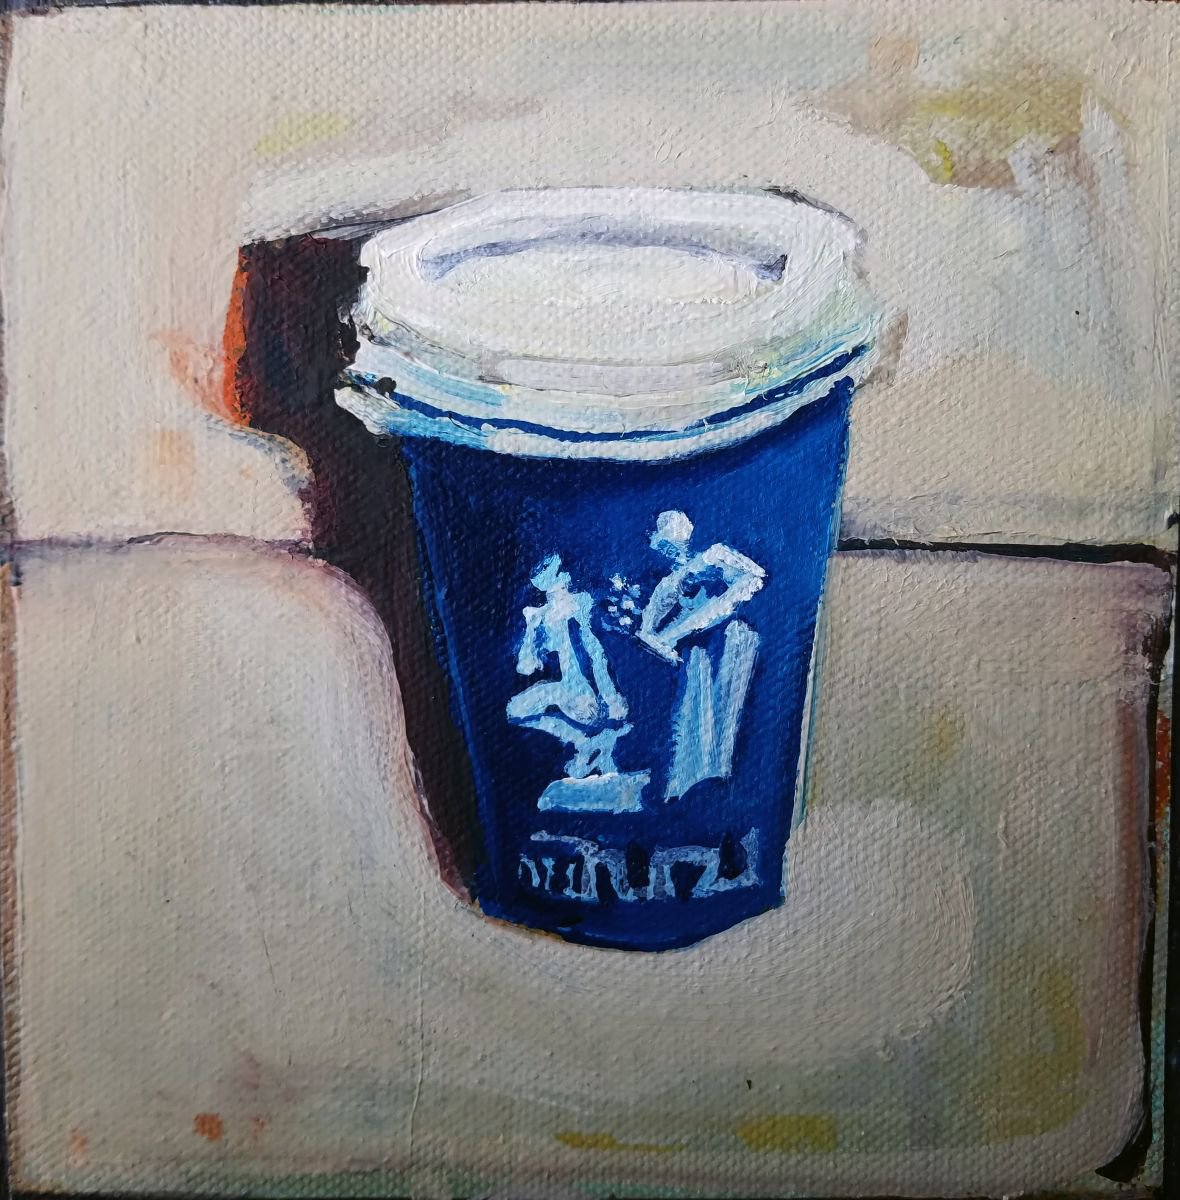 Still Life with Ubiquitous New York Coffee Cup by Shelton Walsmith